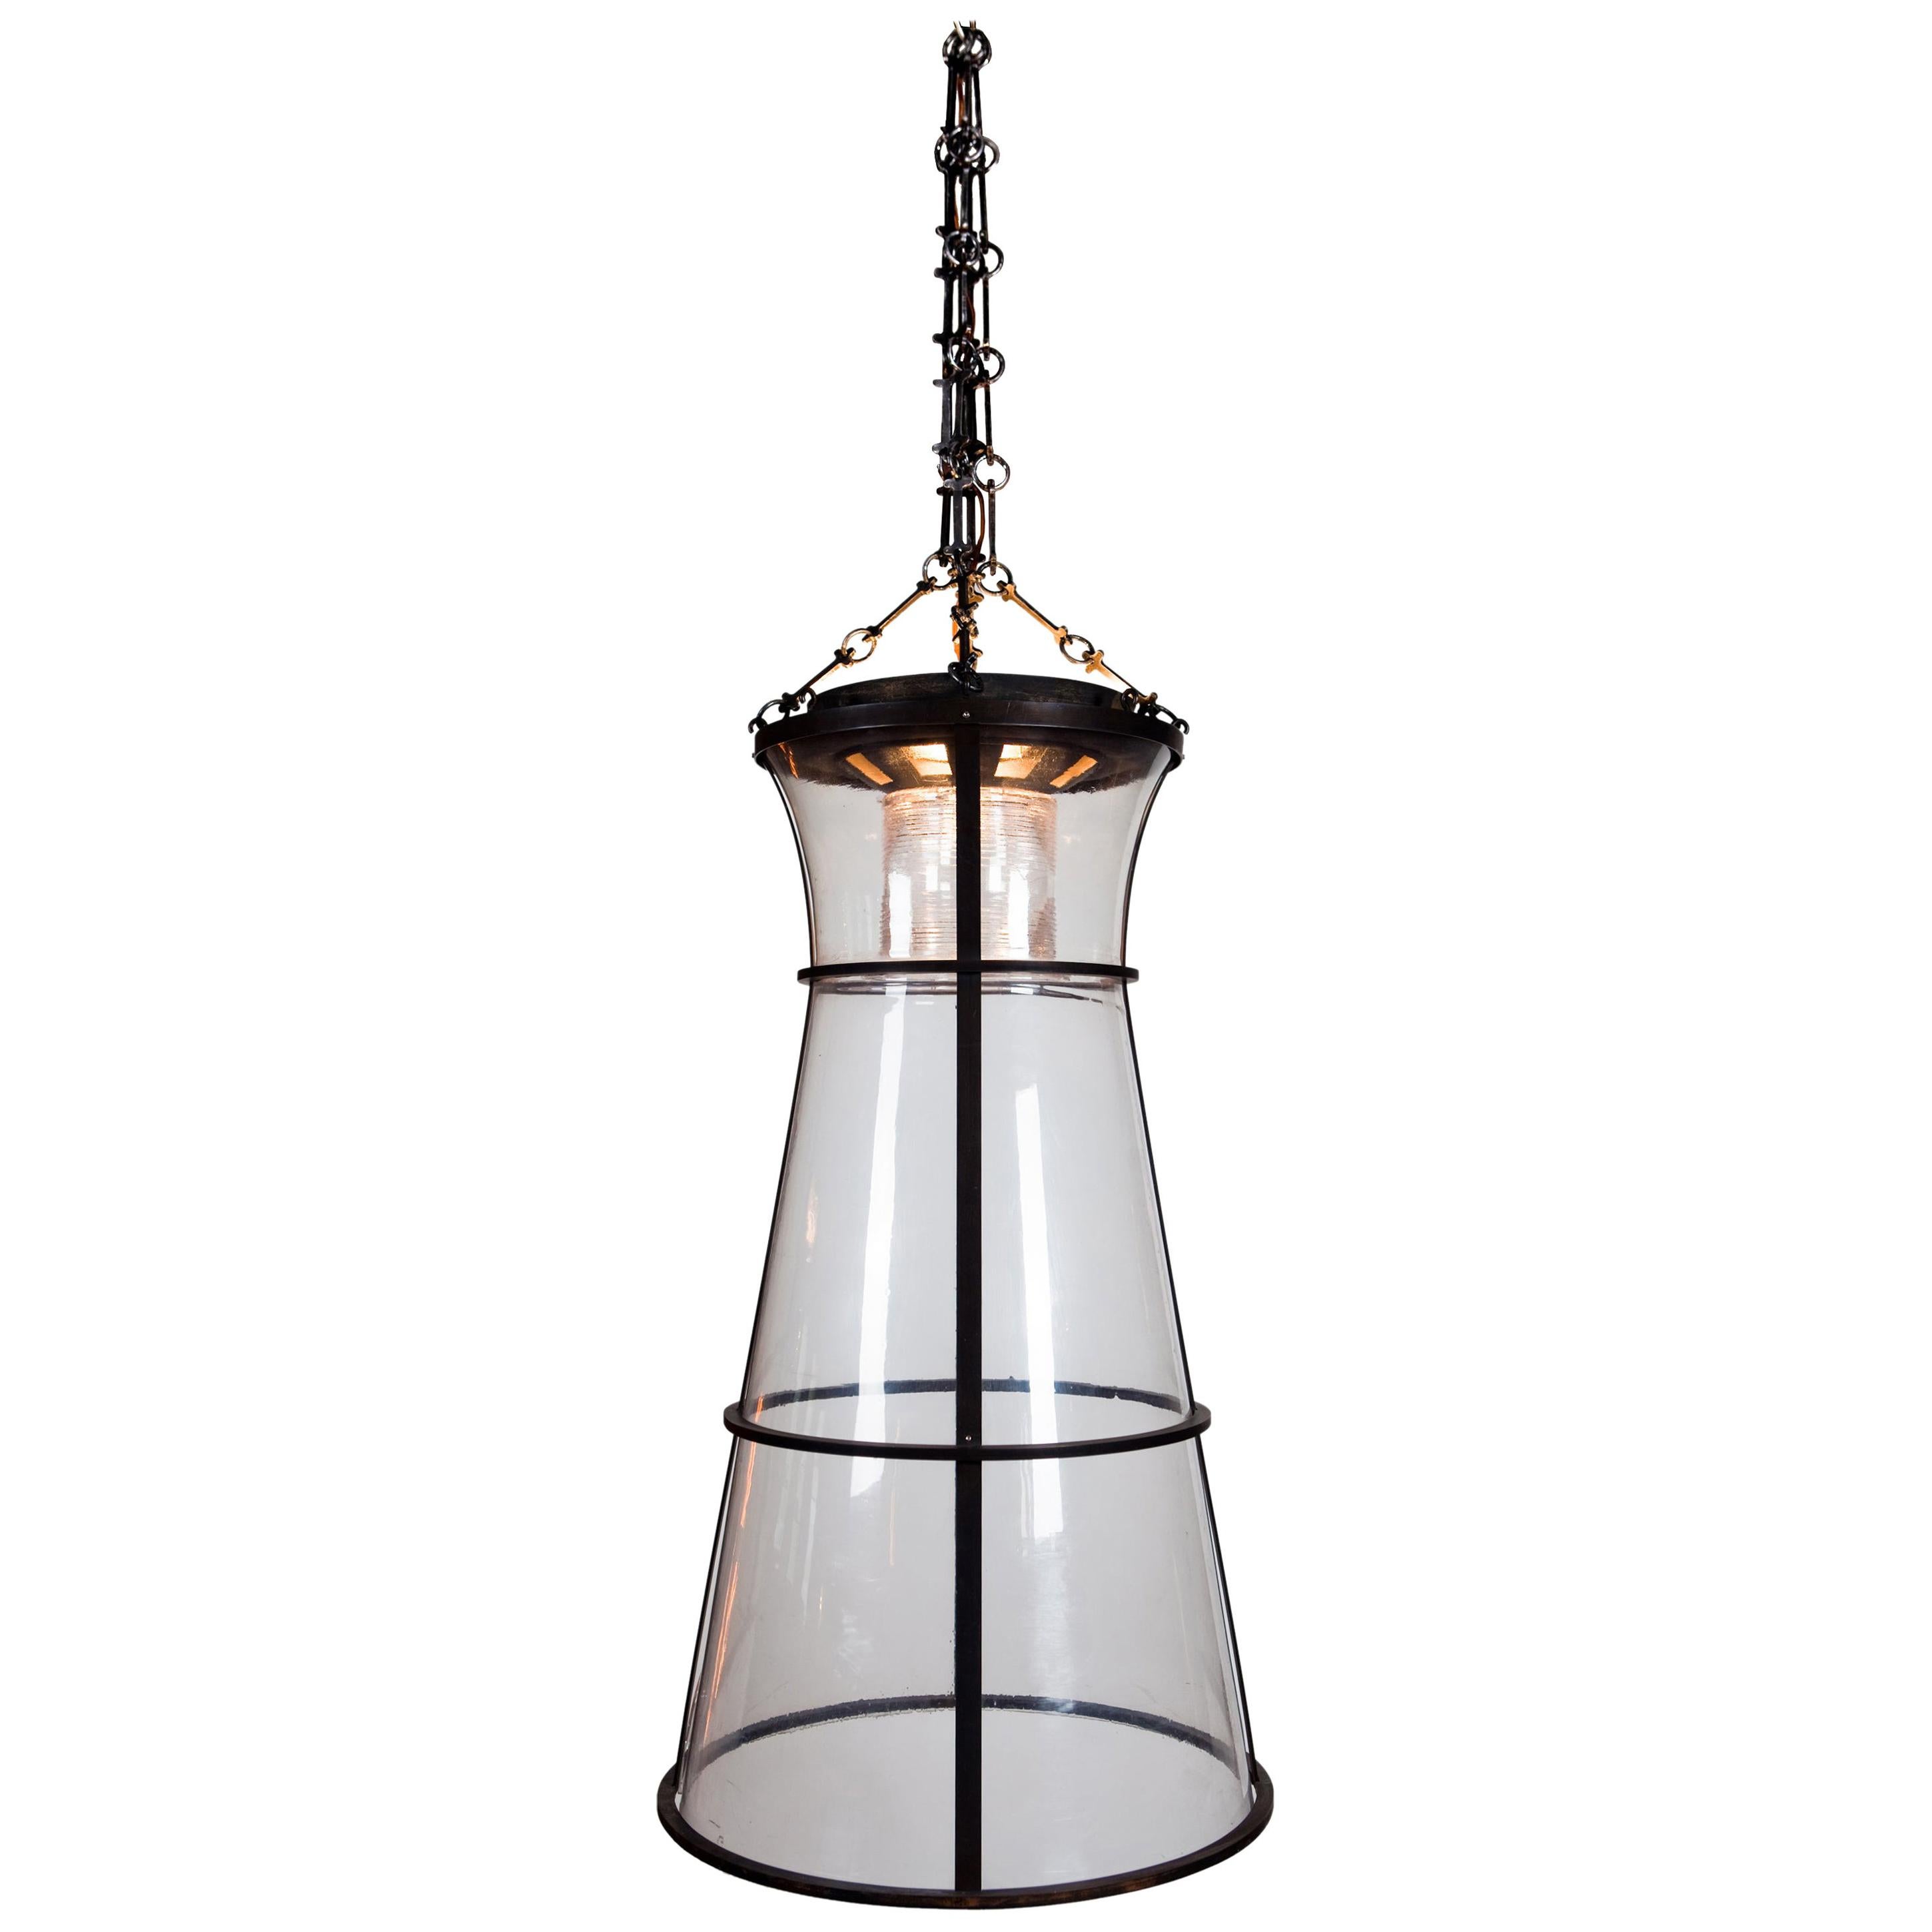 Lighthouse Cone Polycarbonate Pendant Created by Atelier Boucquet